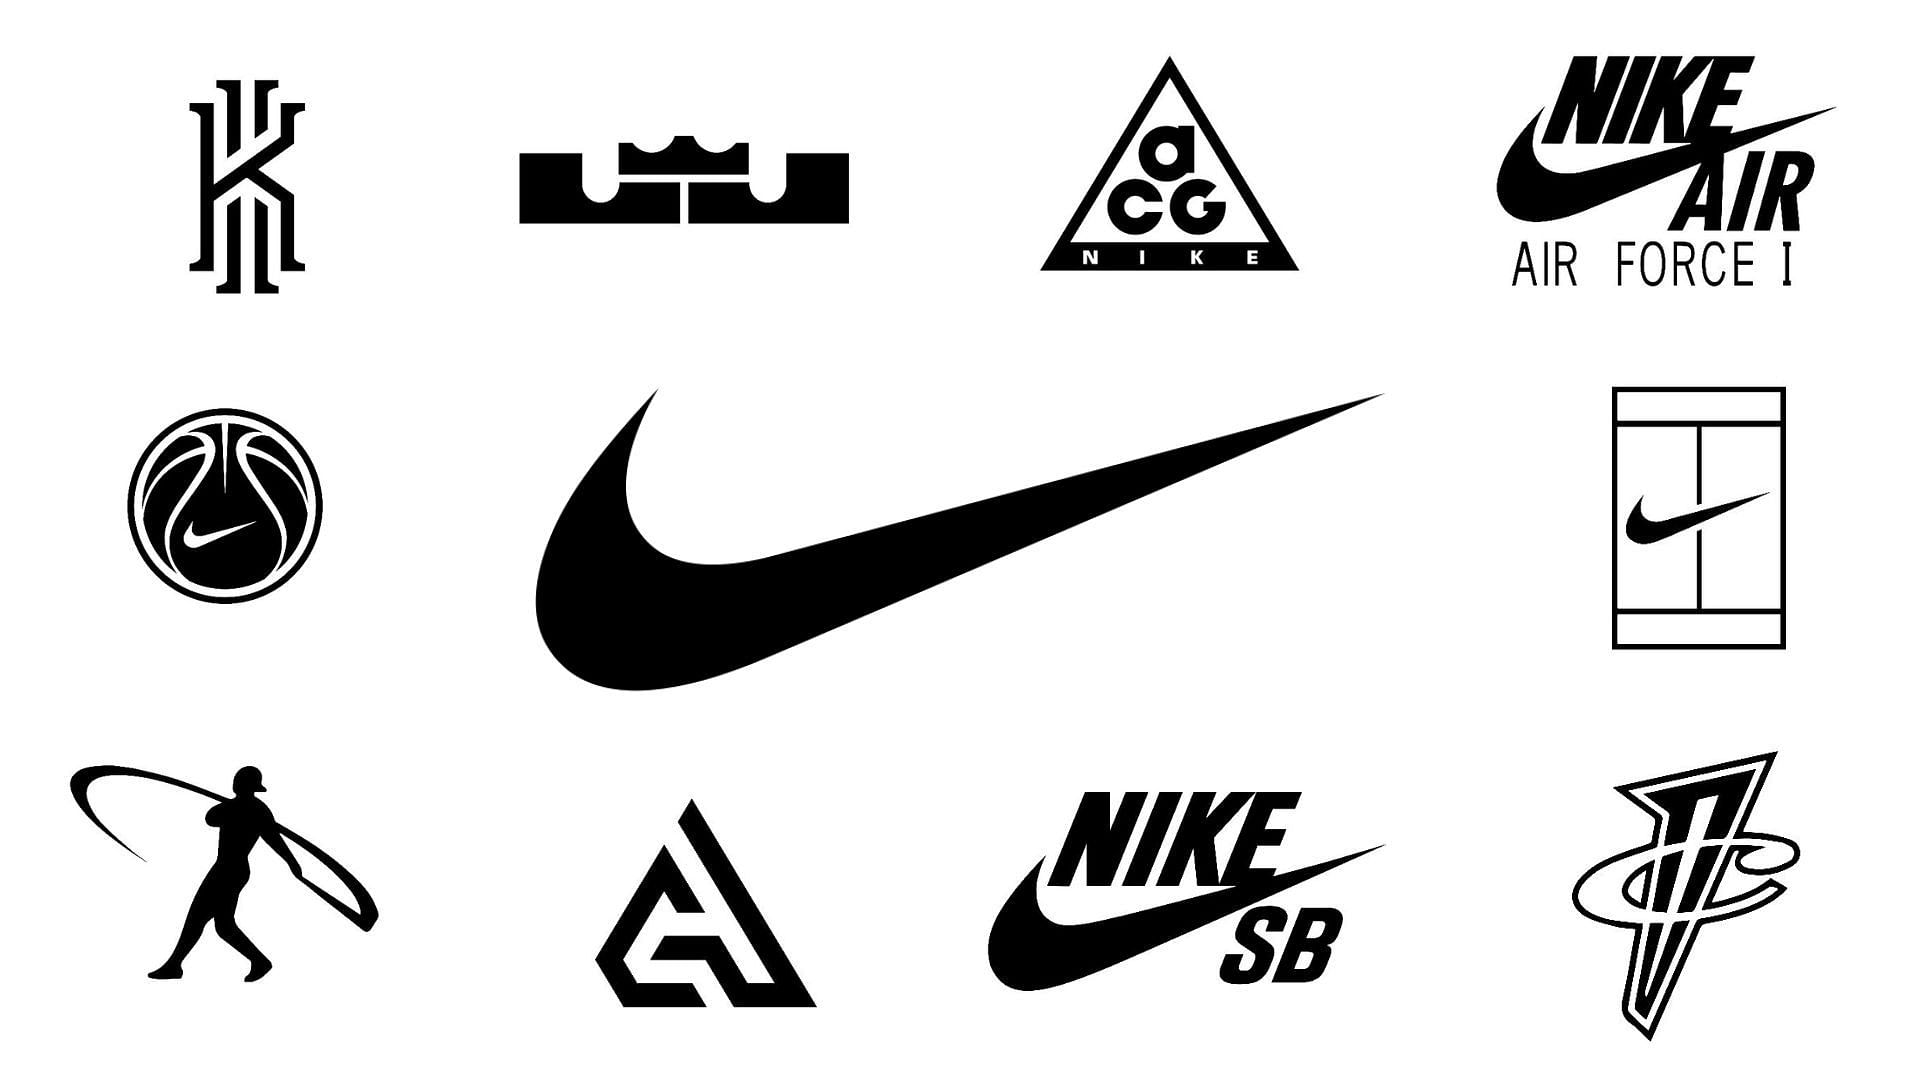 How many different kinds of Nike sneakers are there?